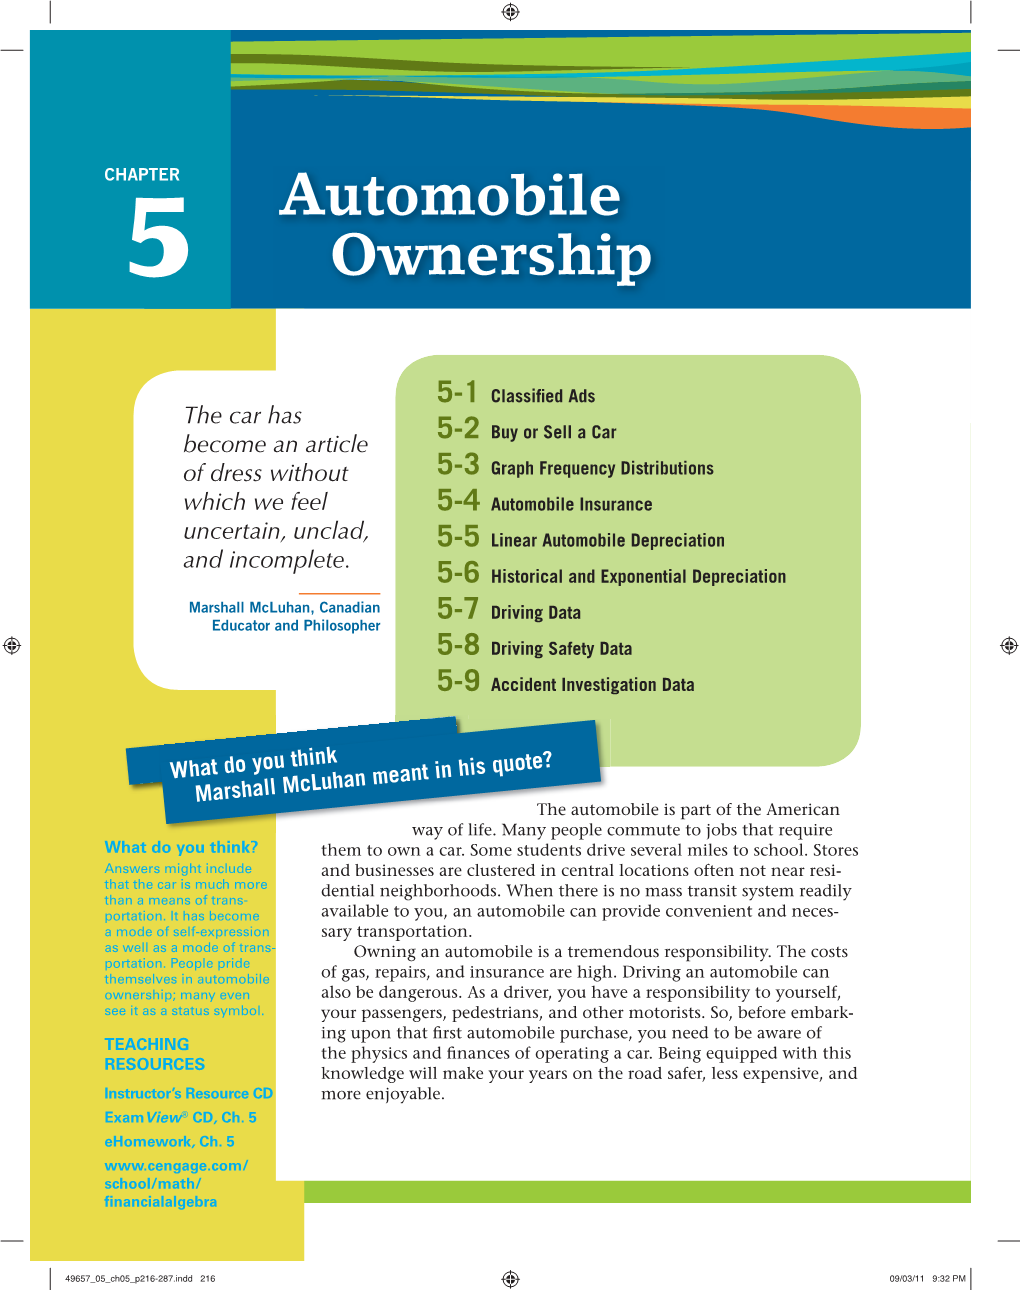 Automobile Ownership